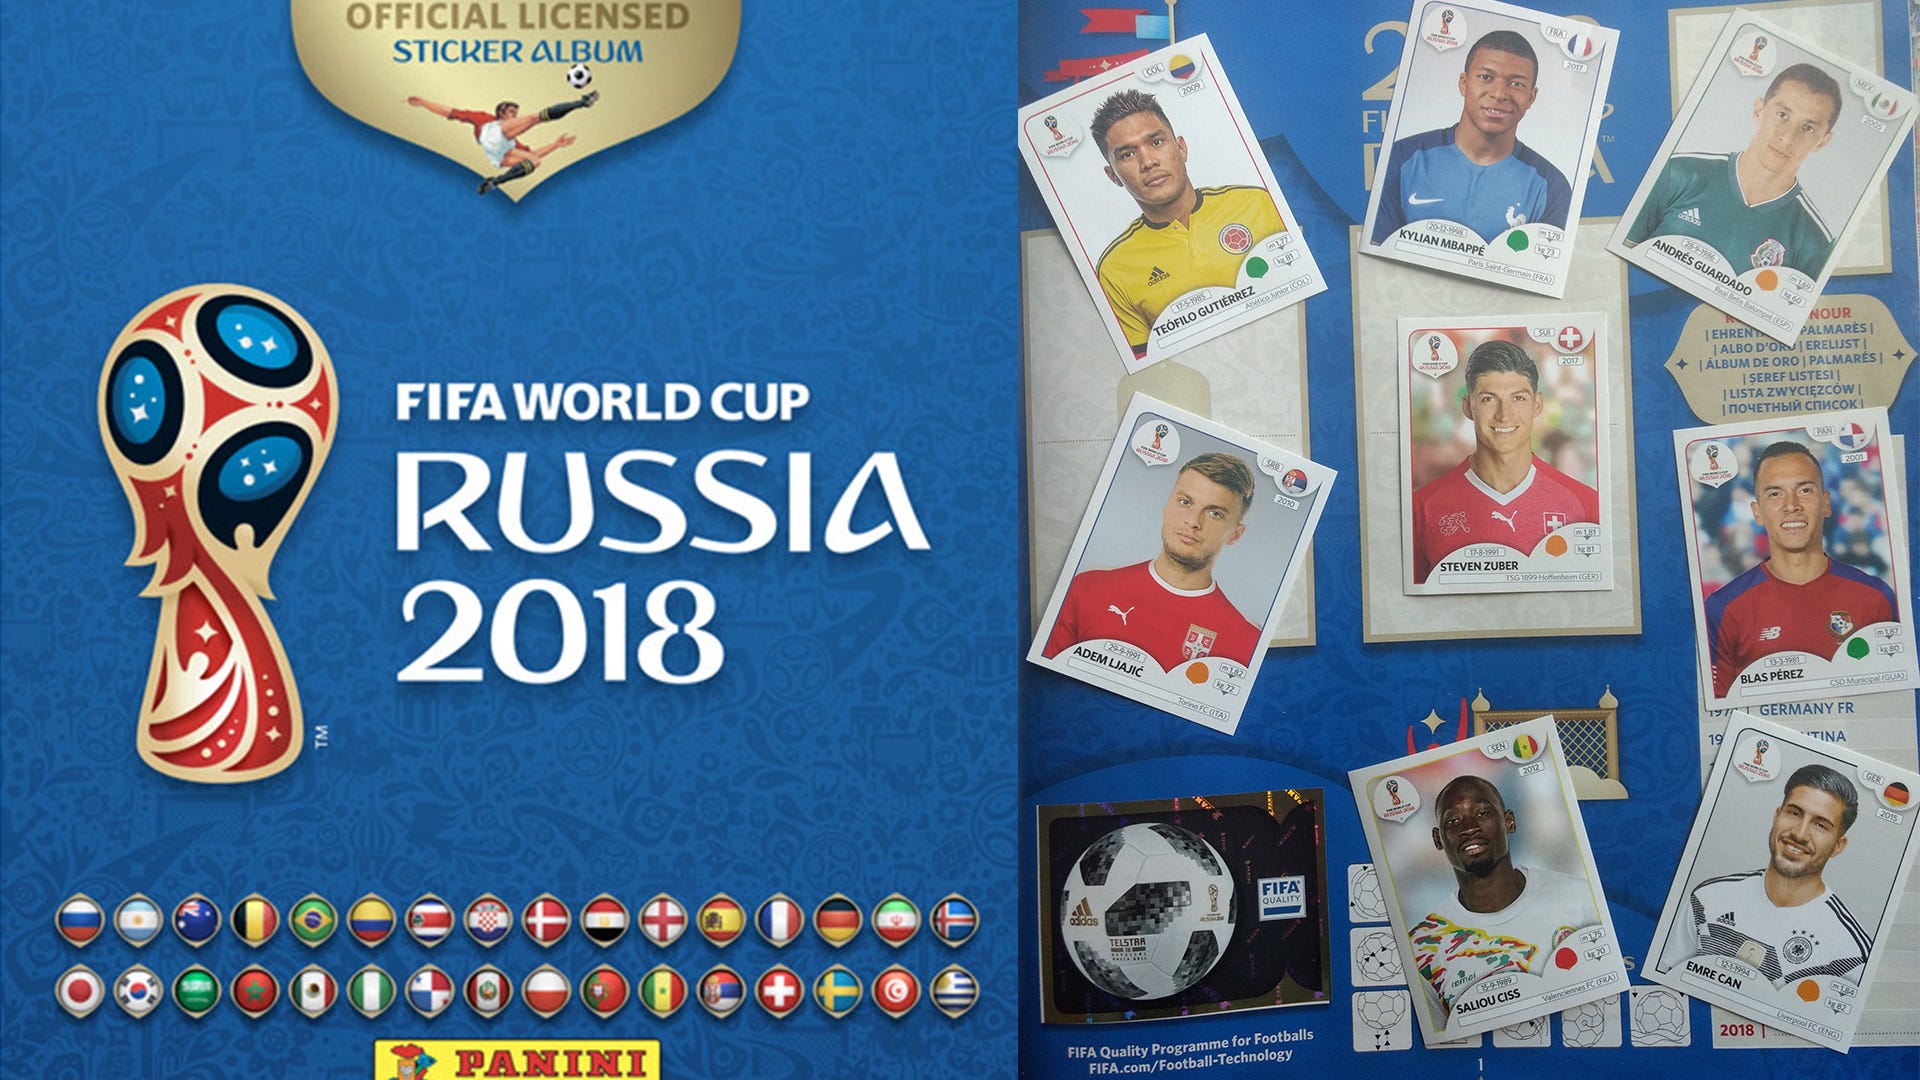 Oliver Giroud Sticker 95 Road to WM 2018 Russia 